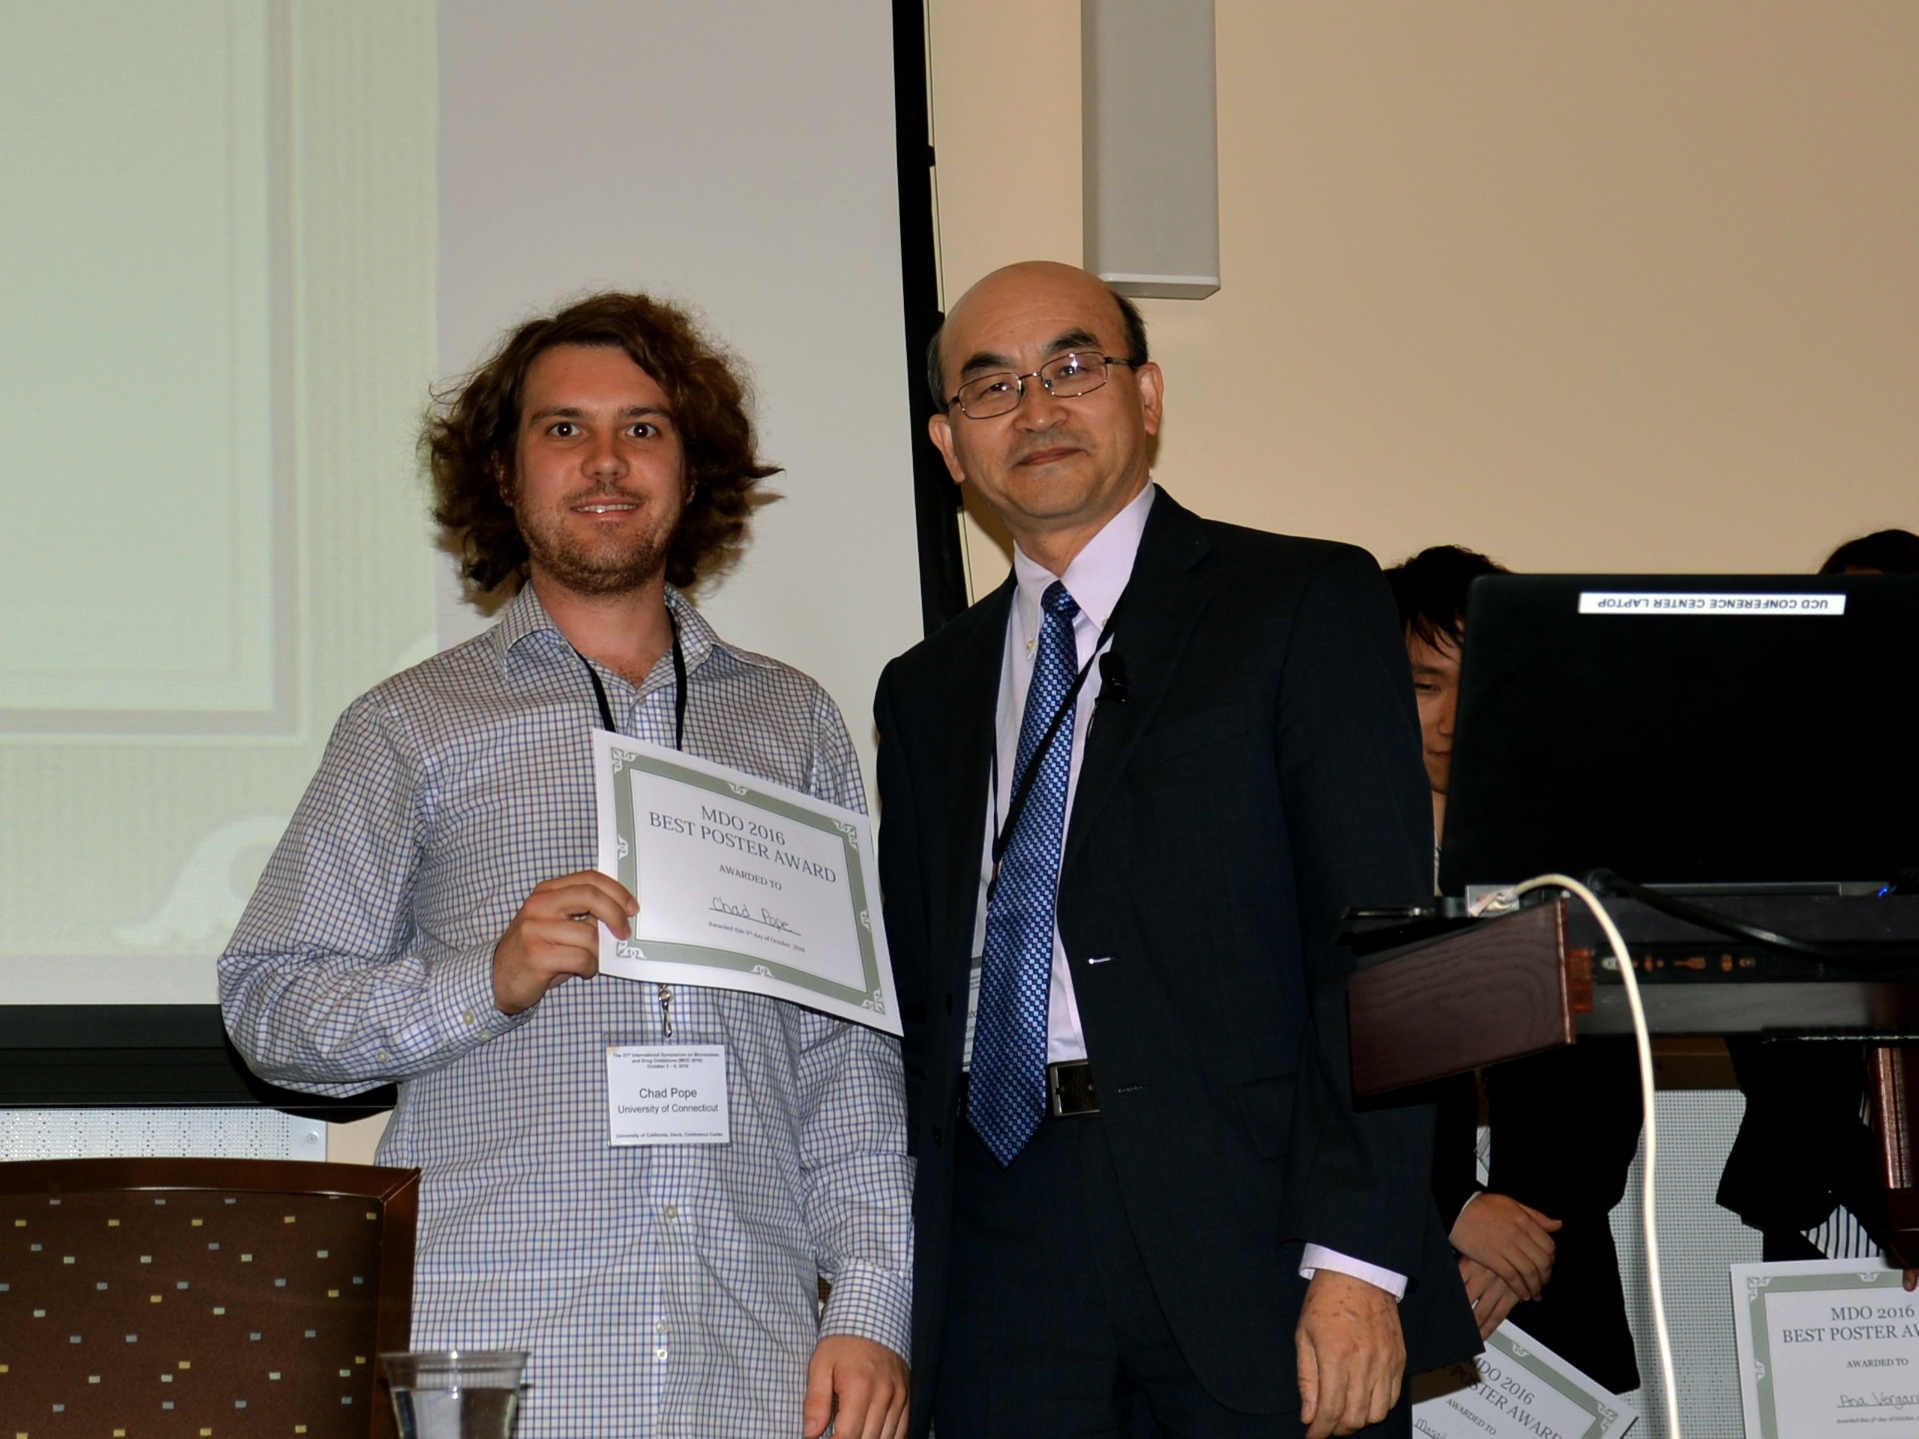 Chad Pope received the Best Poster Award in 21st MDO meeting